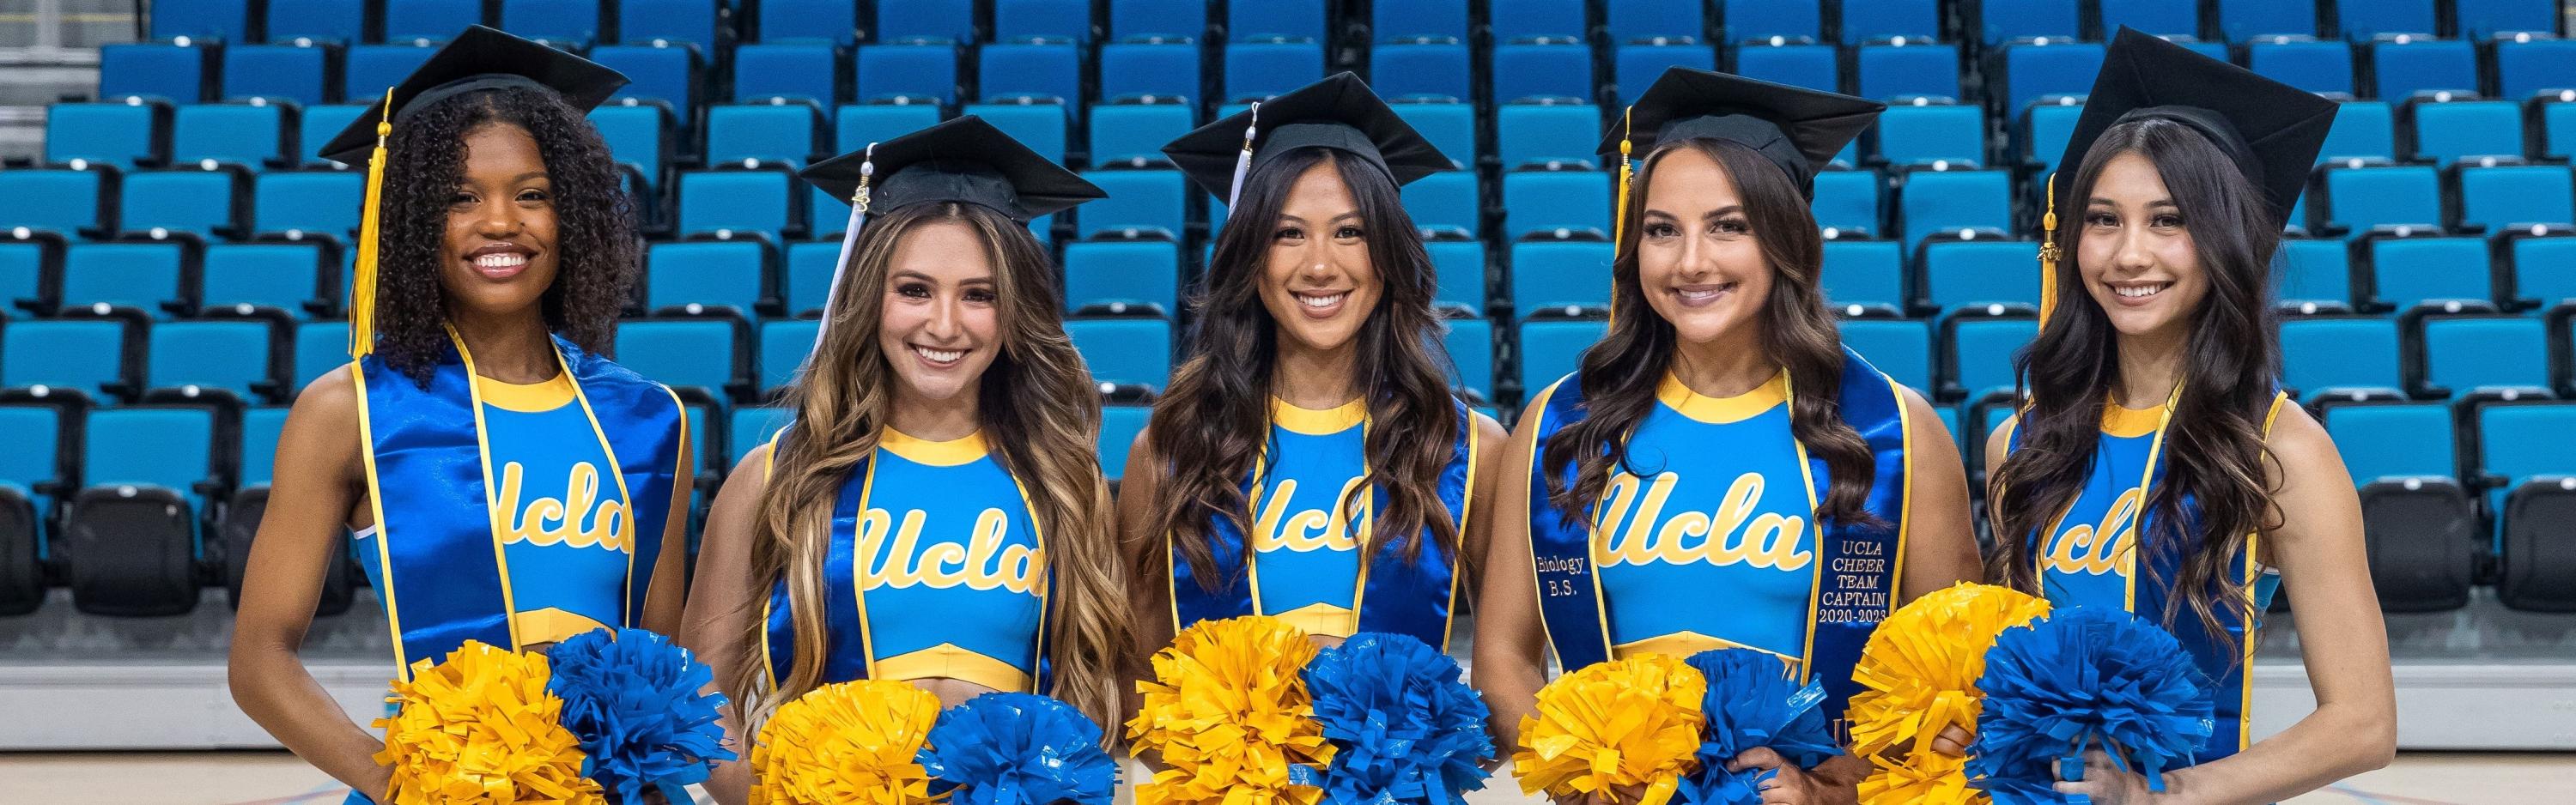 Members of the Cheer Squad at Pauley Pavilion